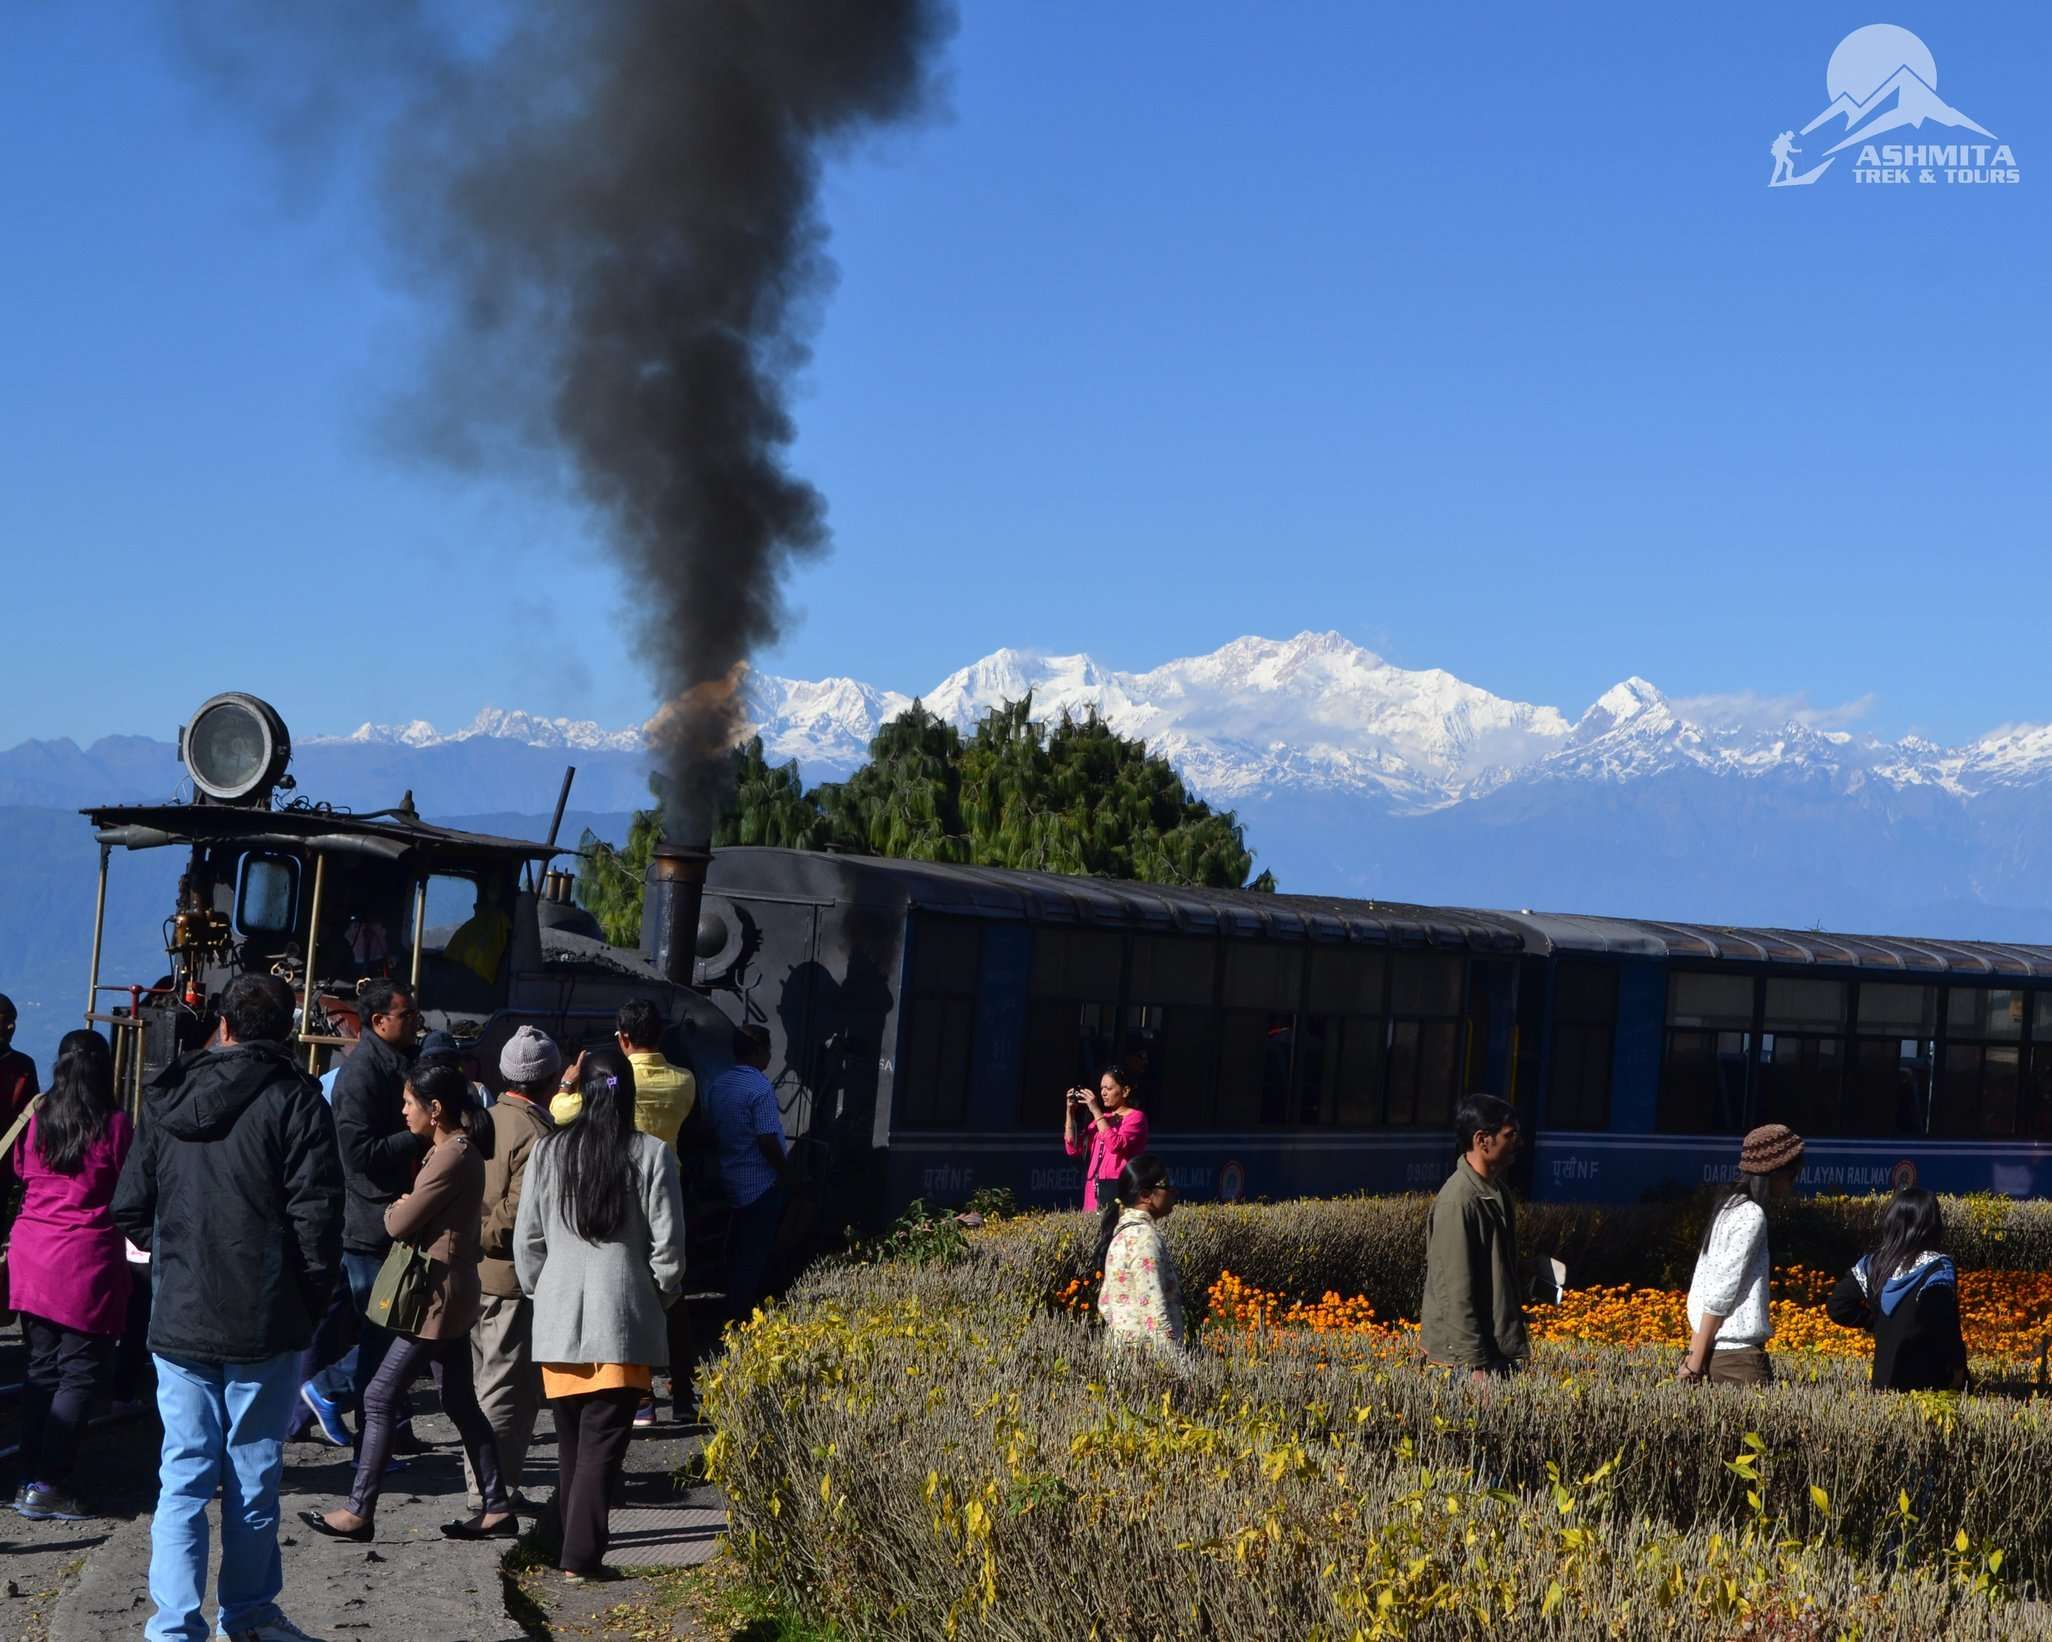 The UNESCO Heritage Darjeeling Himalayan Railway also known as the DHR or the Toy Train